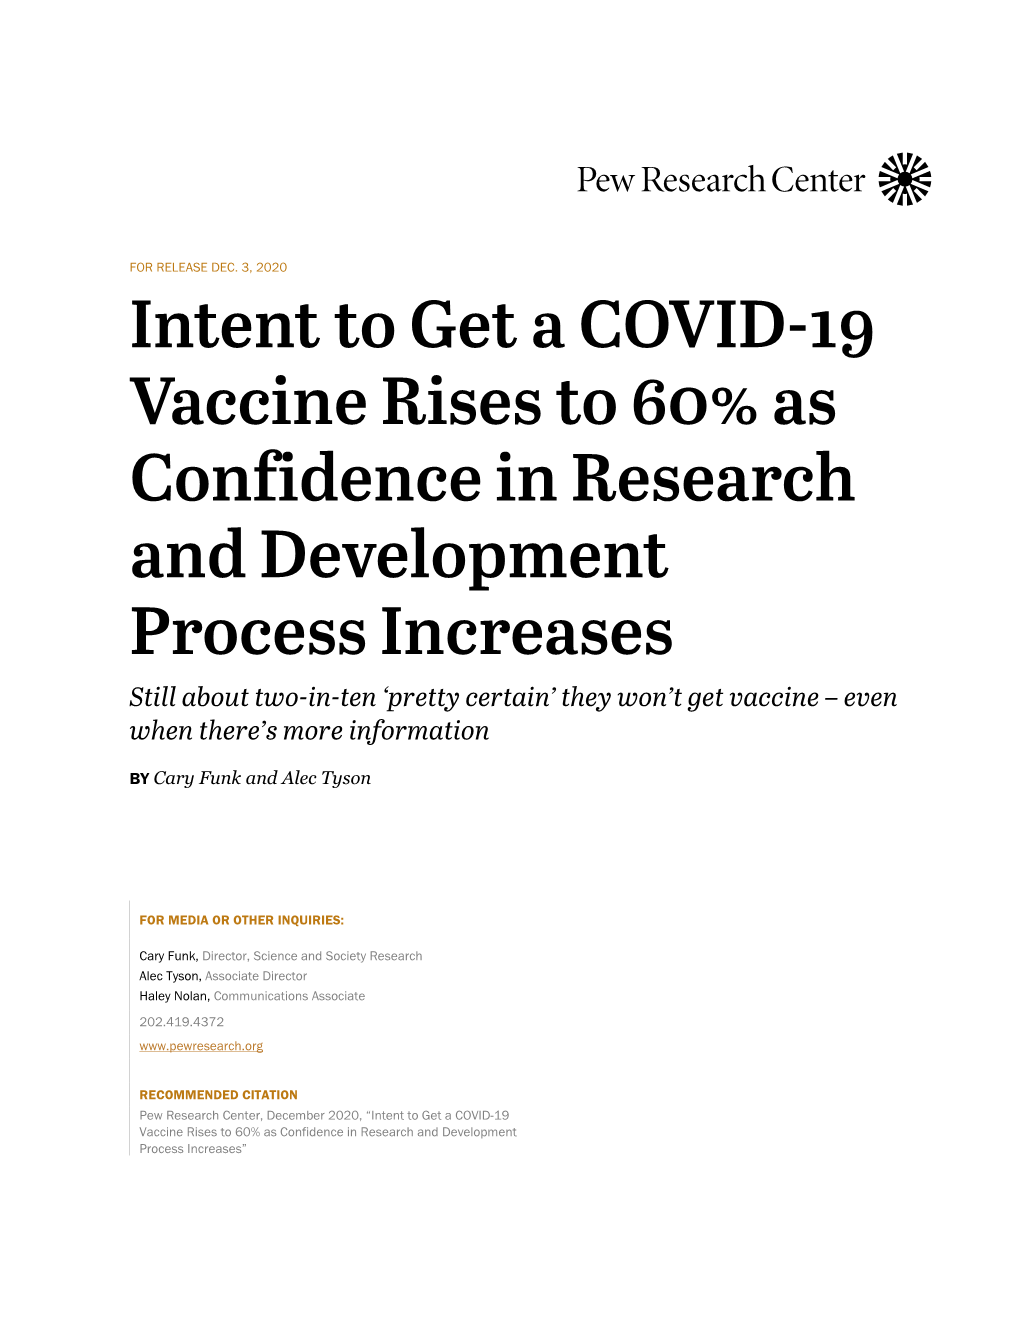 Intent to Get a COVID-19 Vaccine Rises to 60% As Confidence In